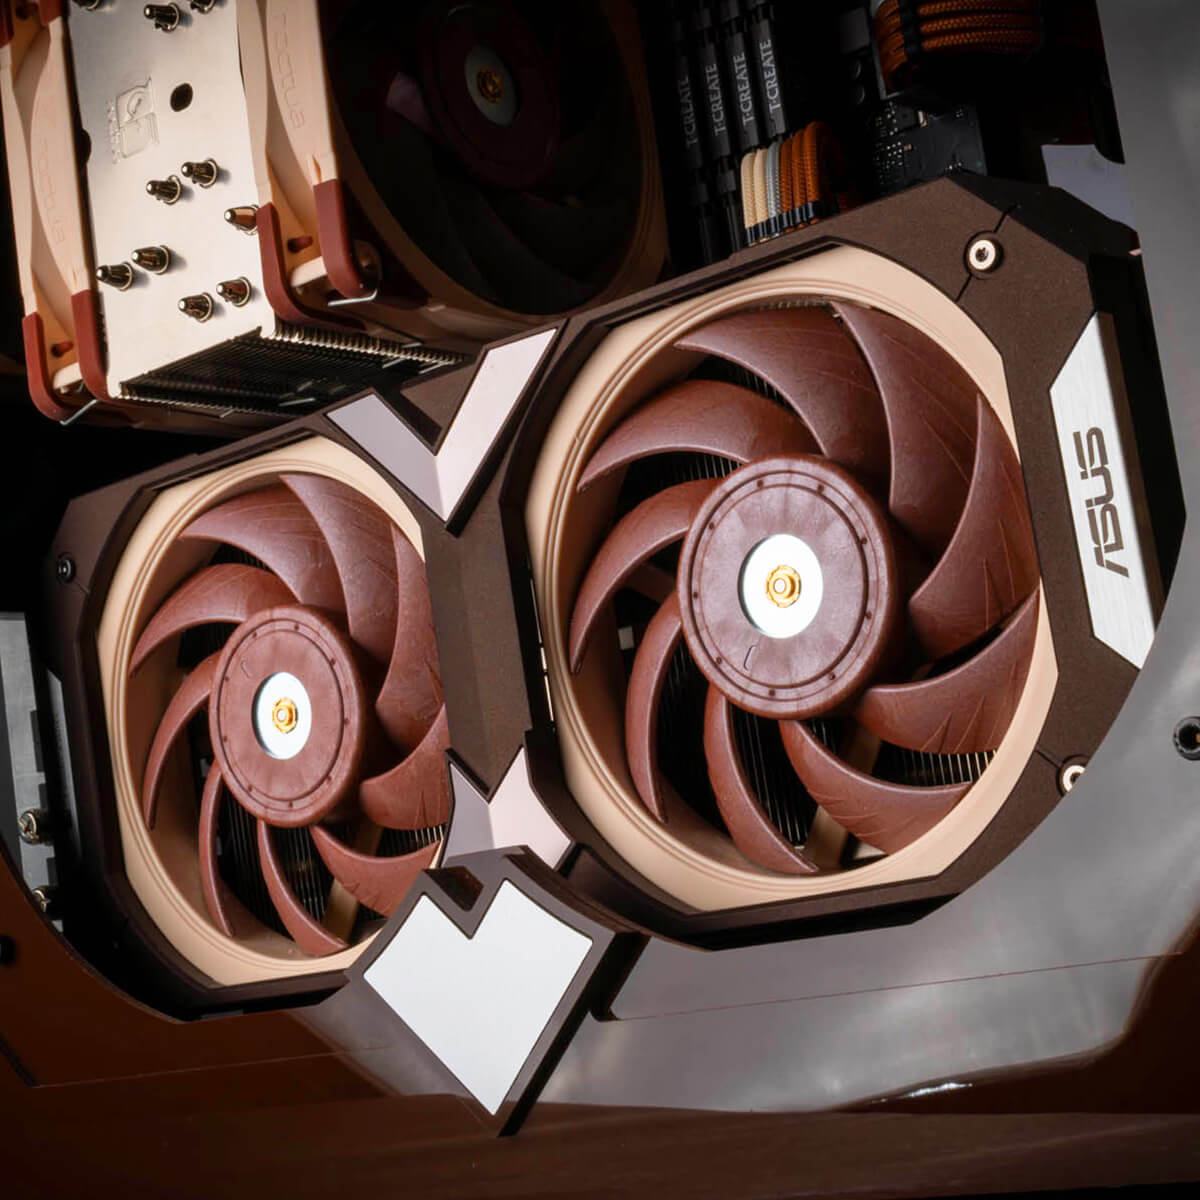 Close-up front view of Noctua Dual graphics card